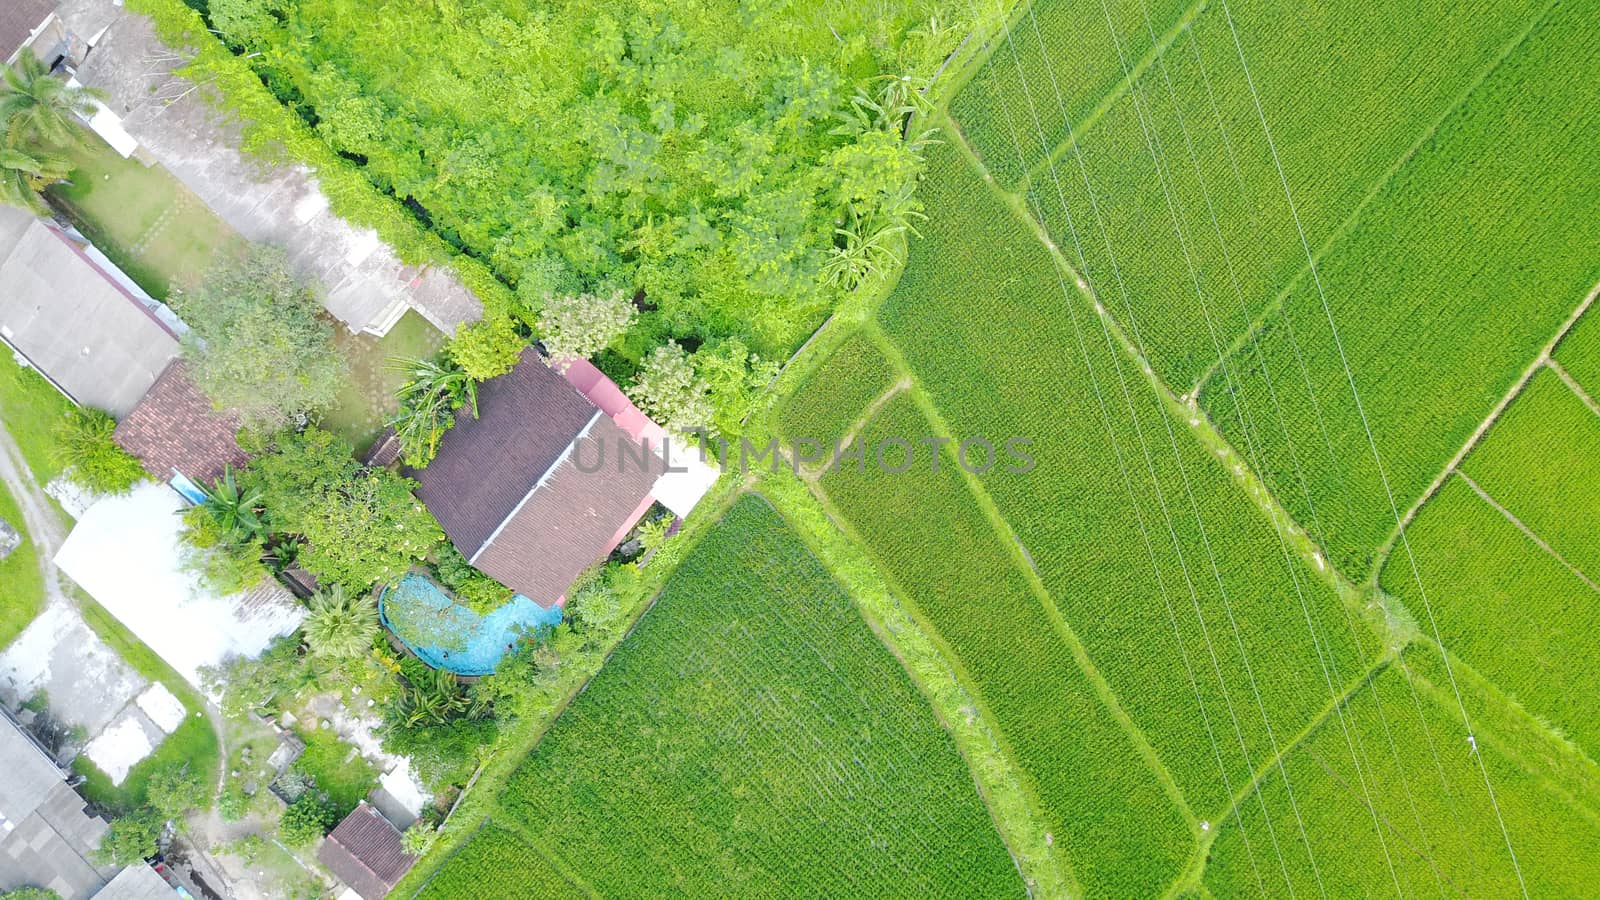 House with a swimming pool in the middle of rice fields. Top view from the throne. Huge green fields and bushes. You can see trails, rooftops, and a swimming pool. Life on the island of Bali.